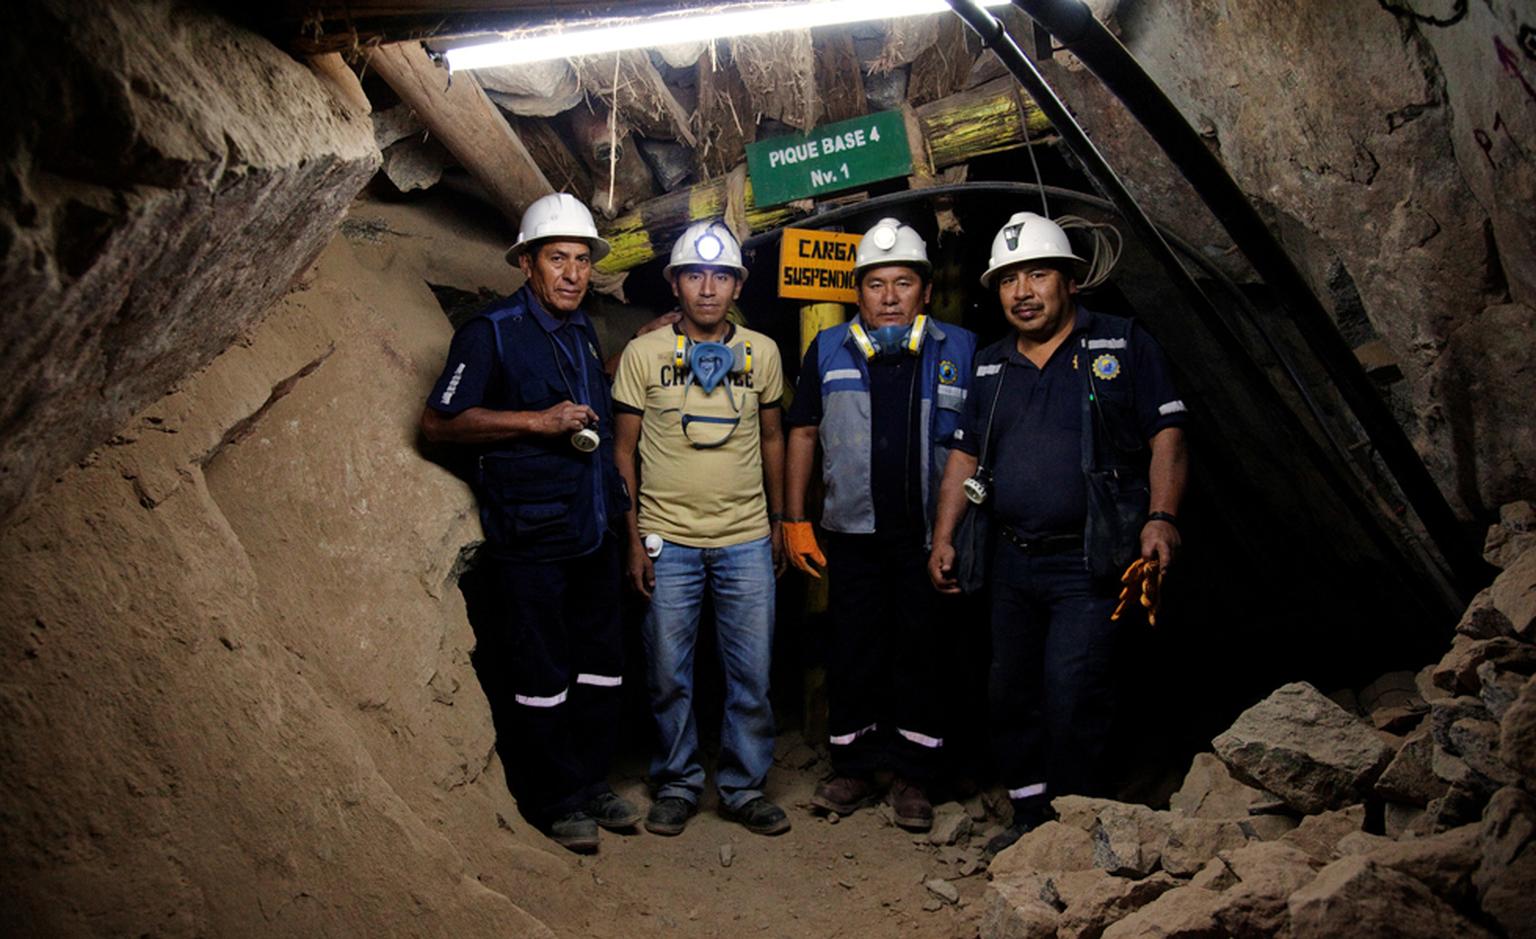 Workers inside the SOTRAMI gold mine in Santa Filomena, in Peru. SOTRAMI is one of the cooperatives working with Fairtrade ensuring a fair deal for small scale gold miners